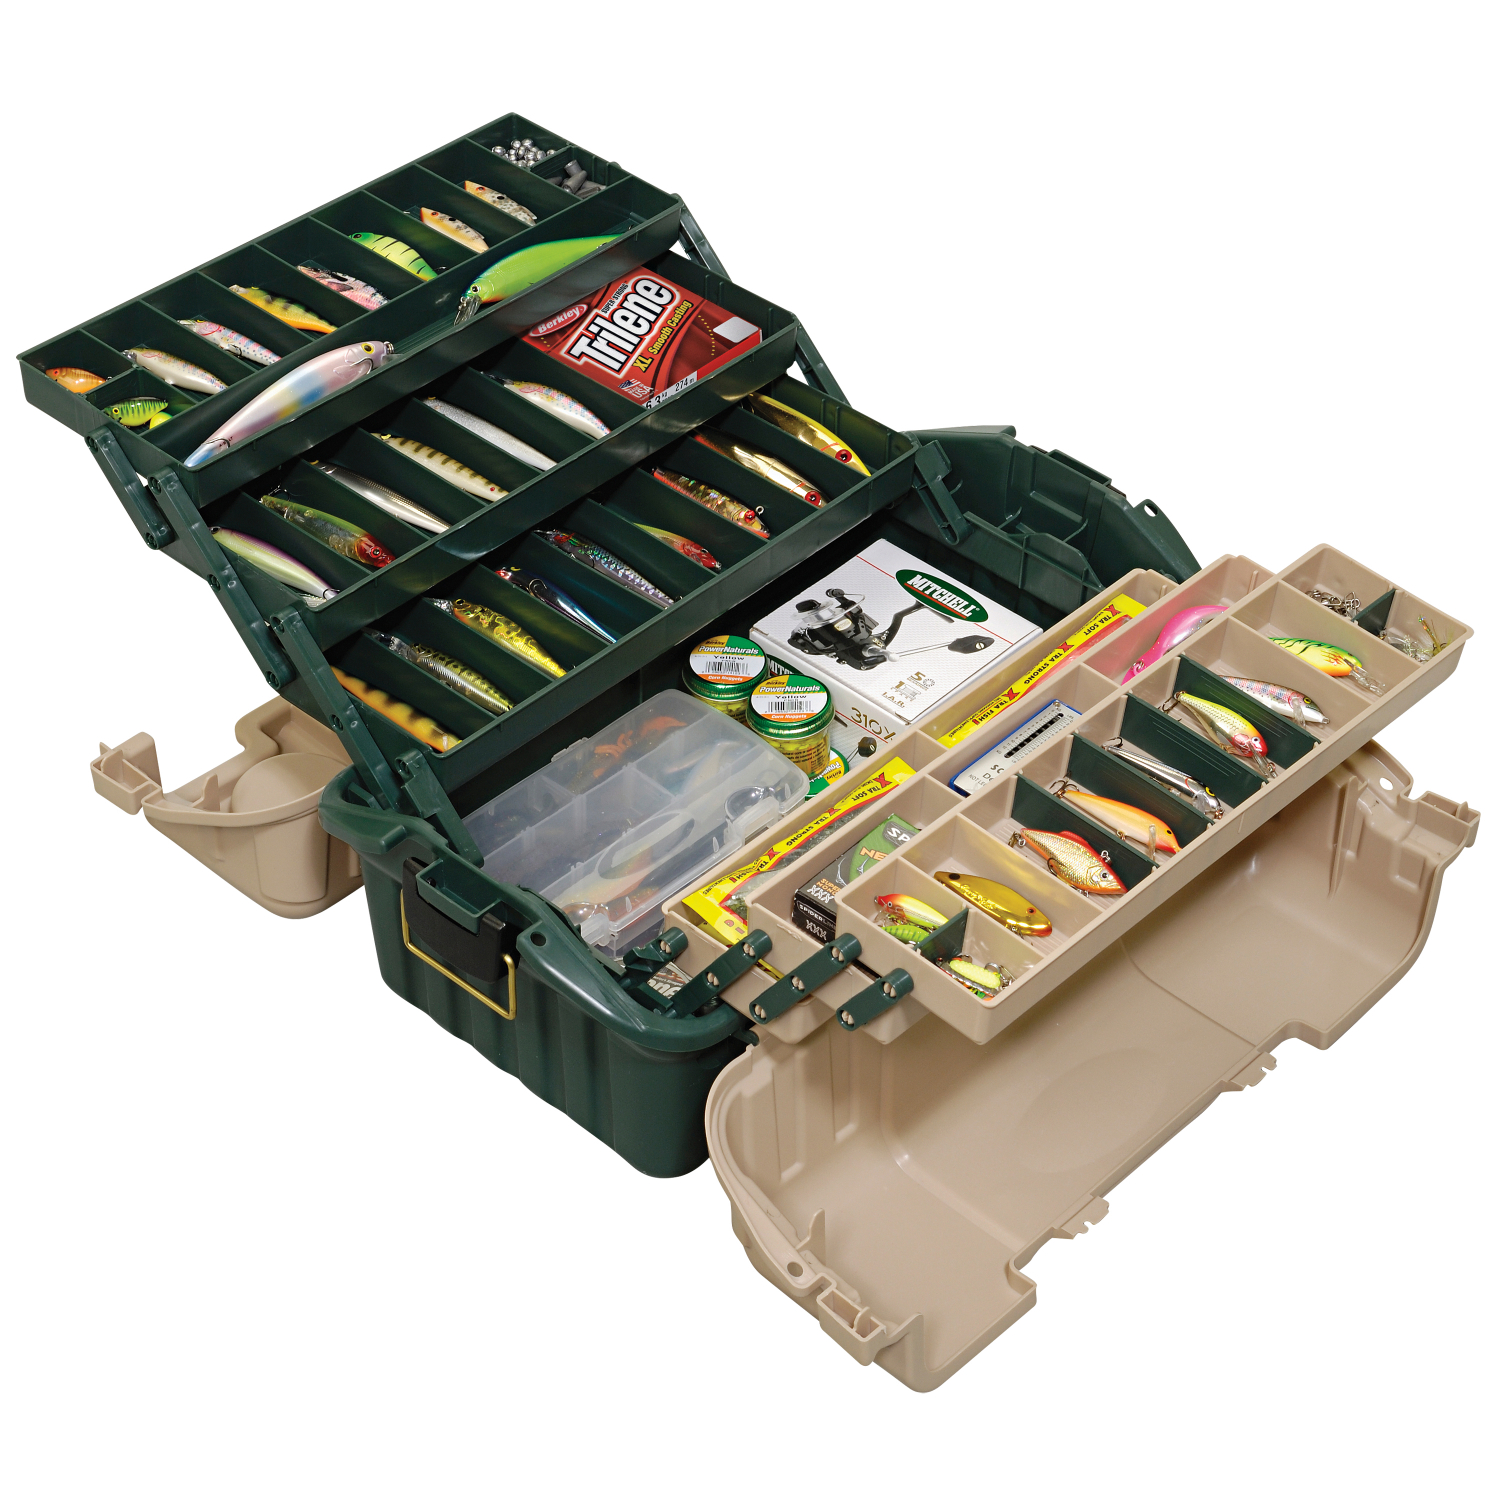 Plano Bait Box Hip Roof Tackle Box at low prices